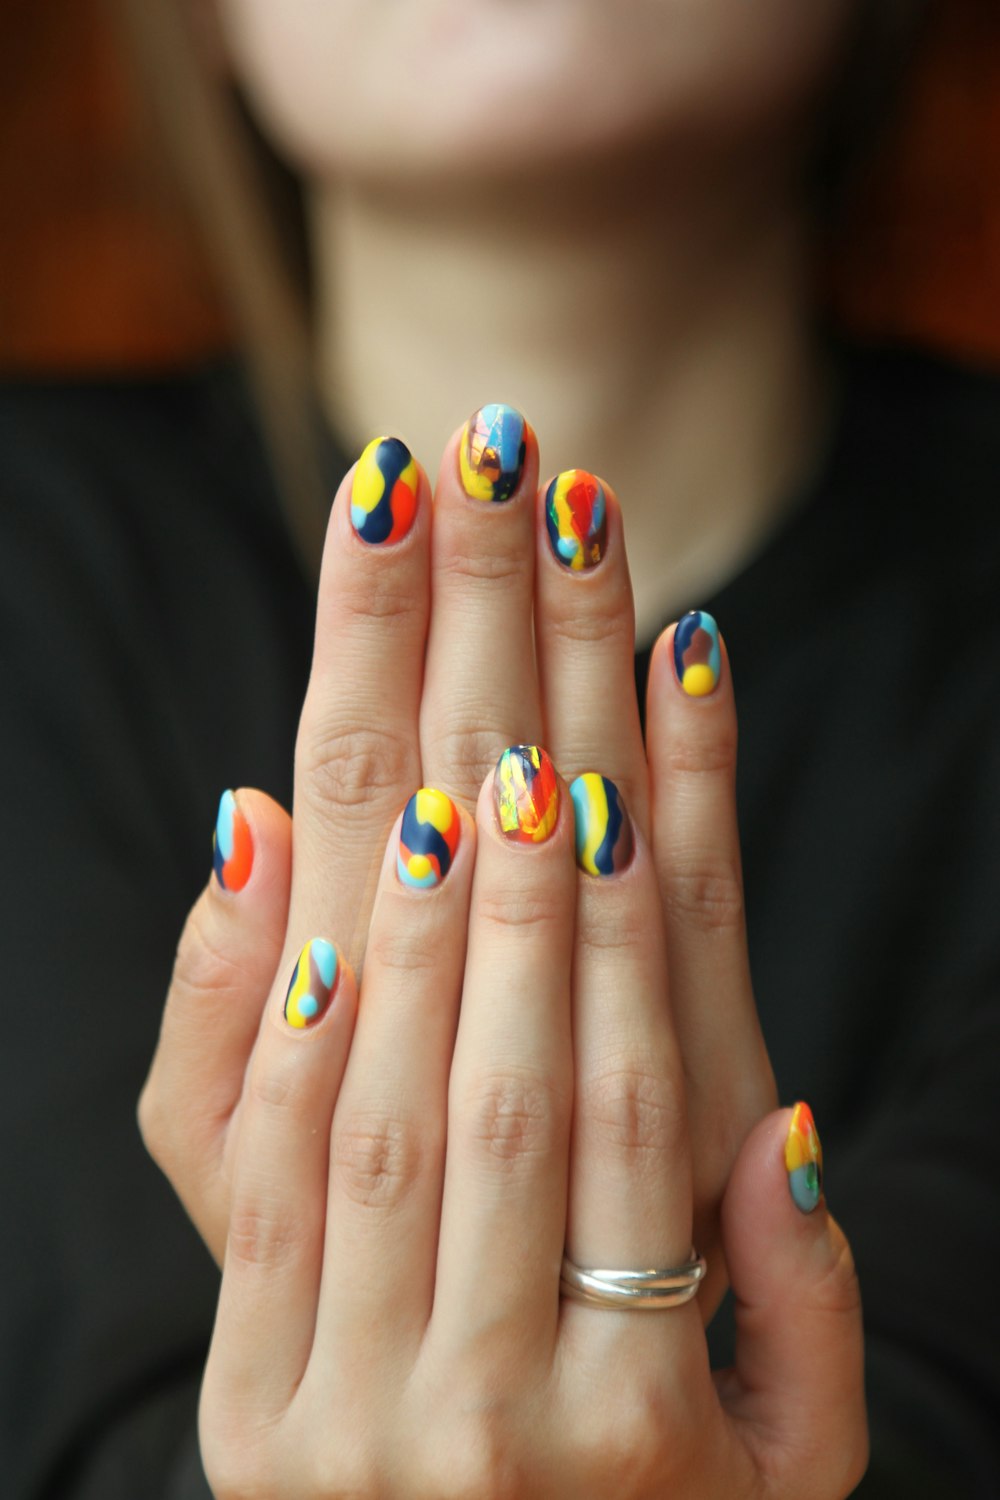 woman's nails with manicure